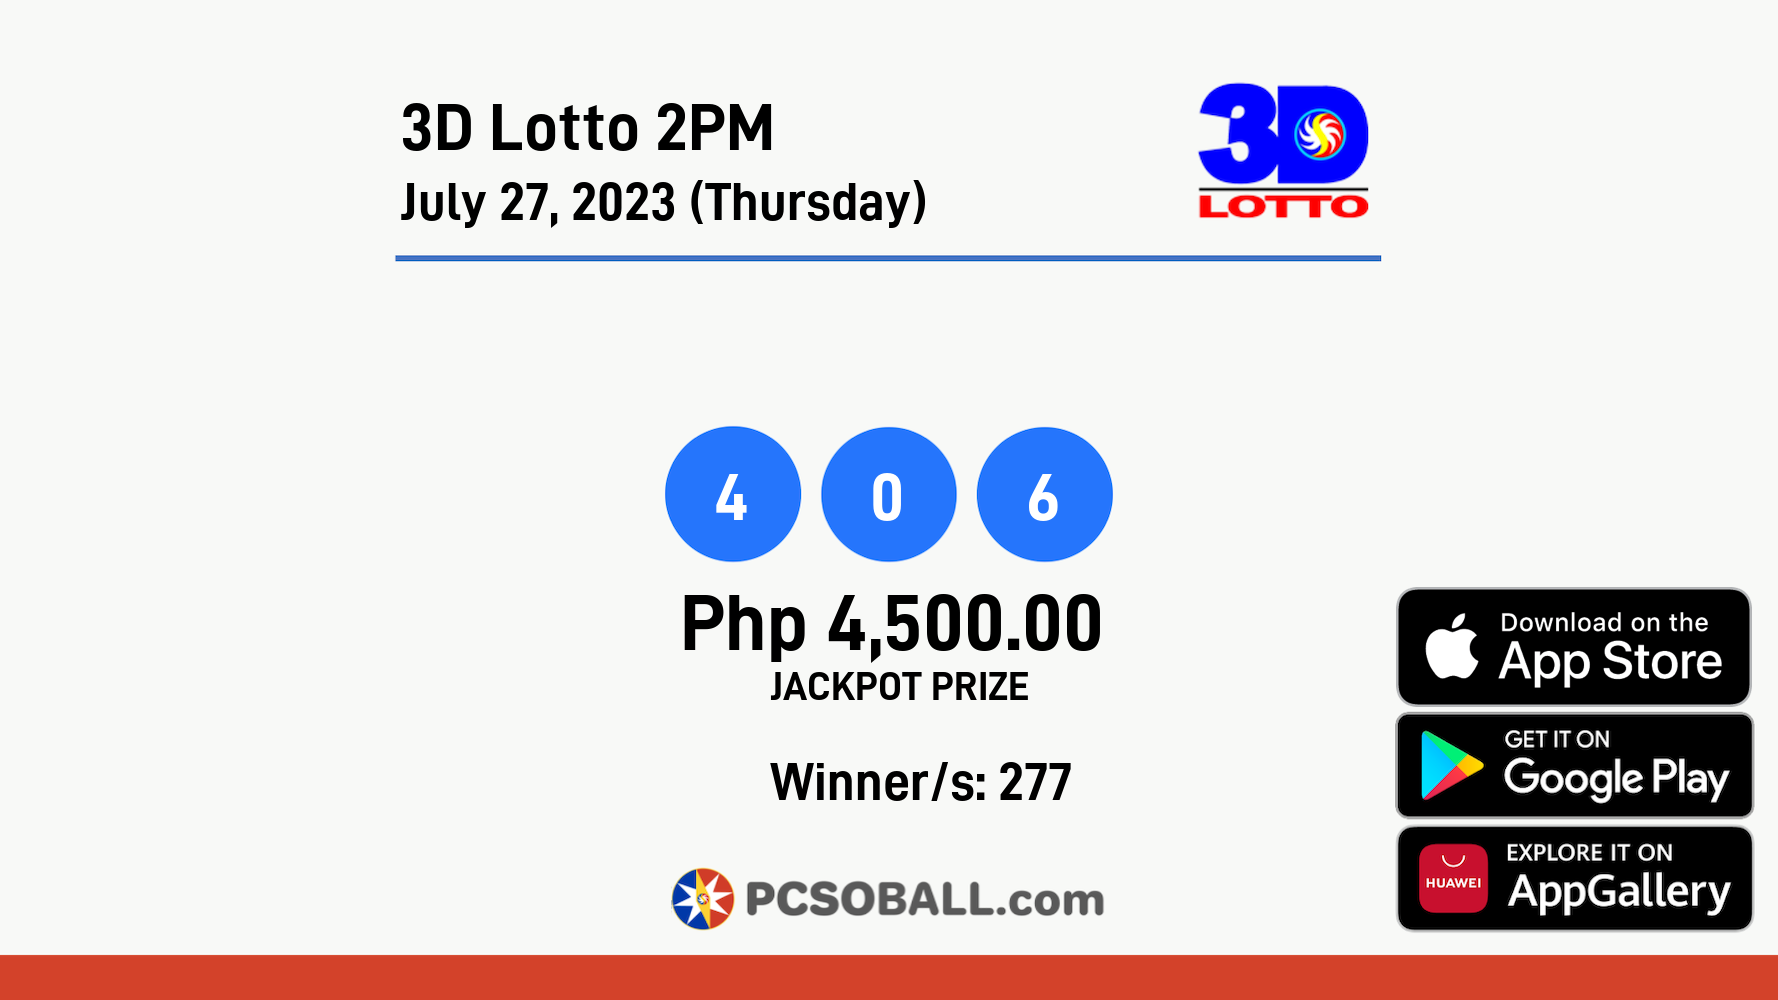 3D Lotto 2PM July 27, 2023 (Thursday) Result